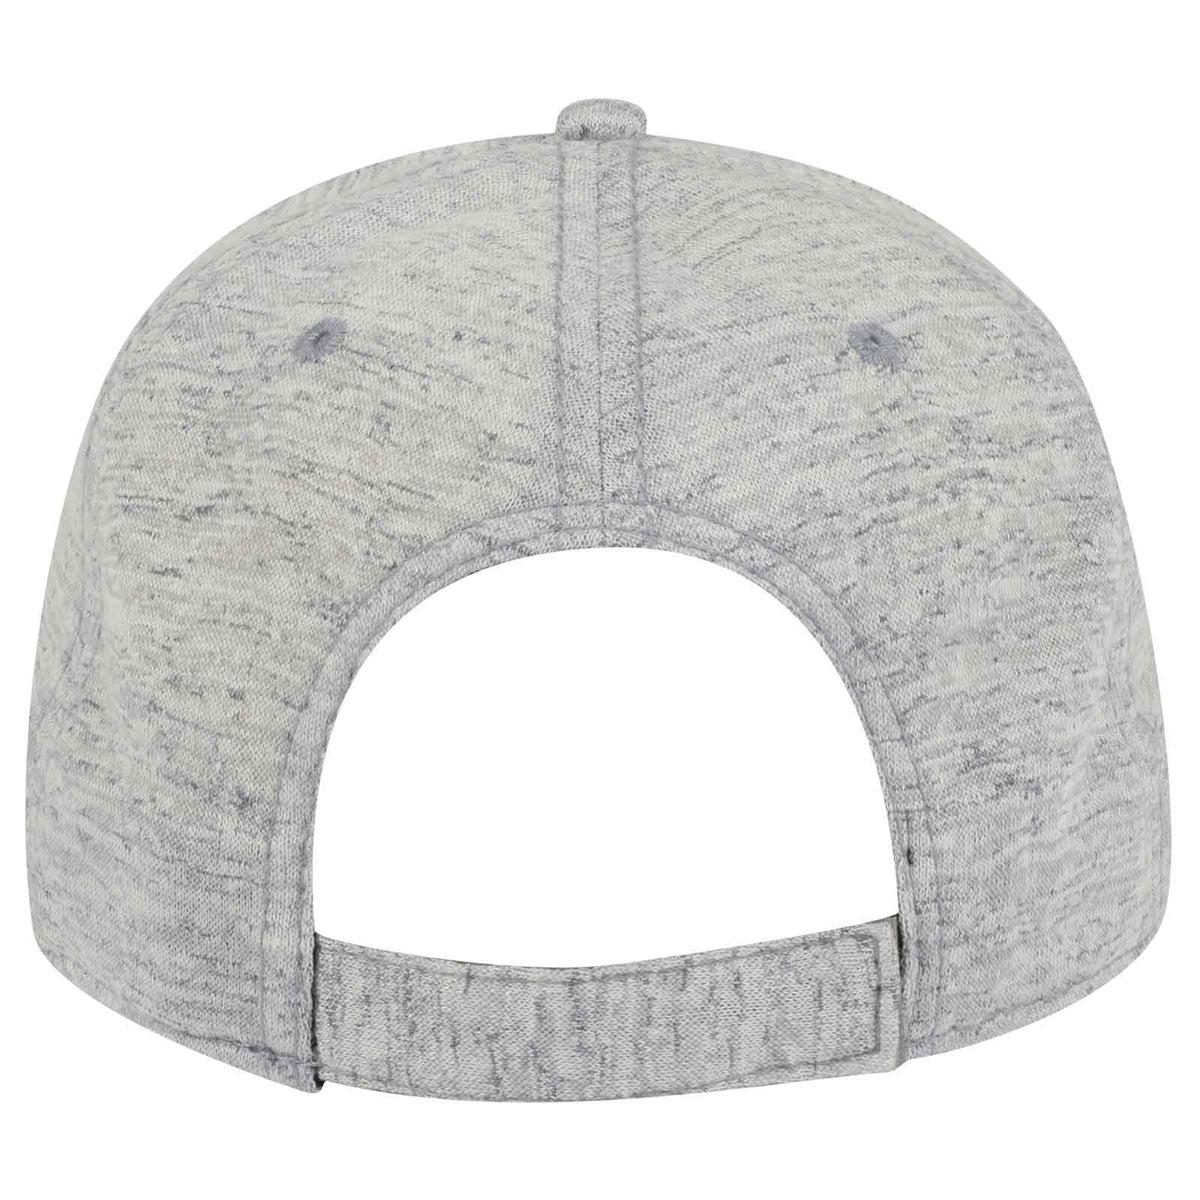 OTTO 19-1232 Otto Comfy Fit 6 Panel Low Profile Baseball Cap - Gray Heather Gray - HIT a Double - 2